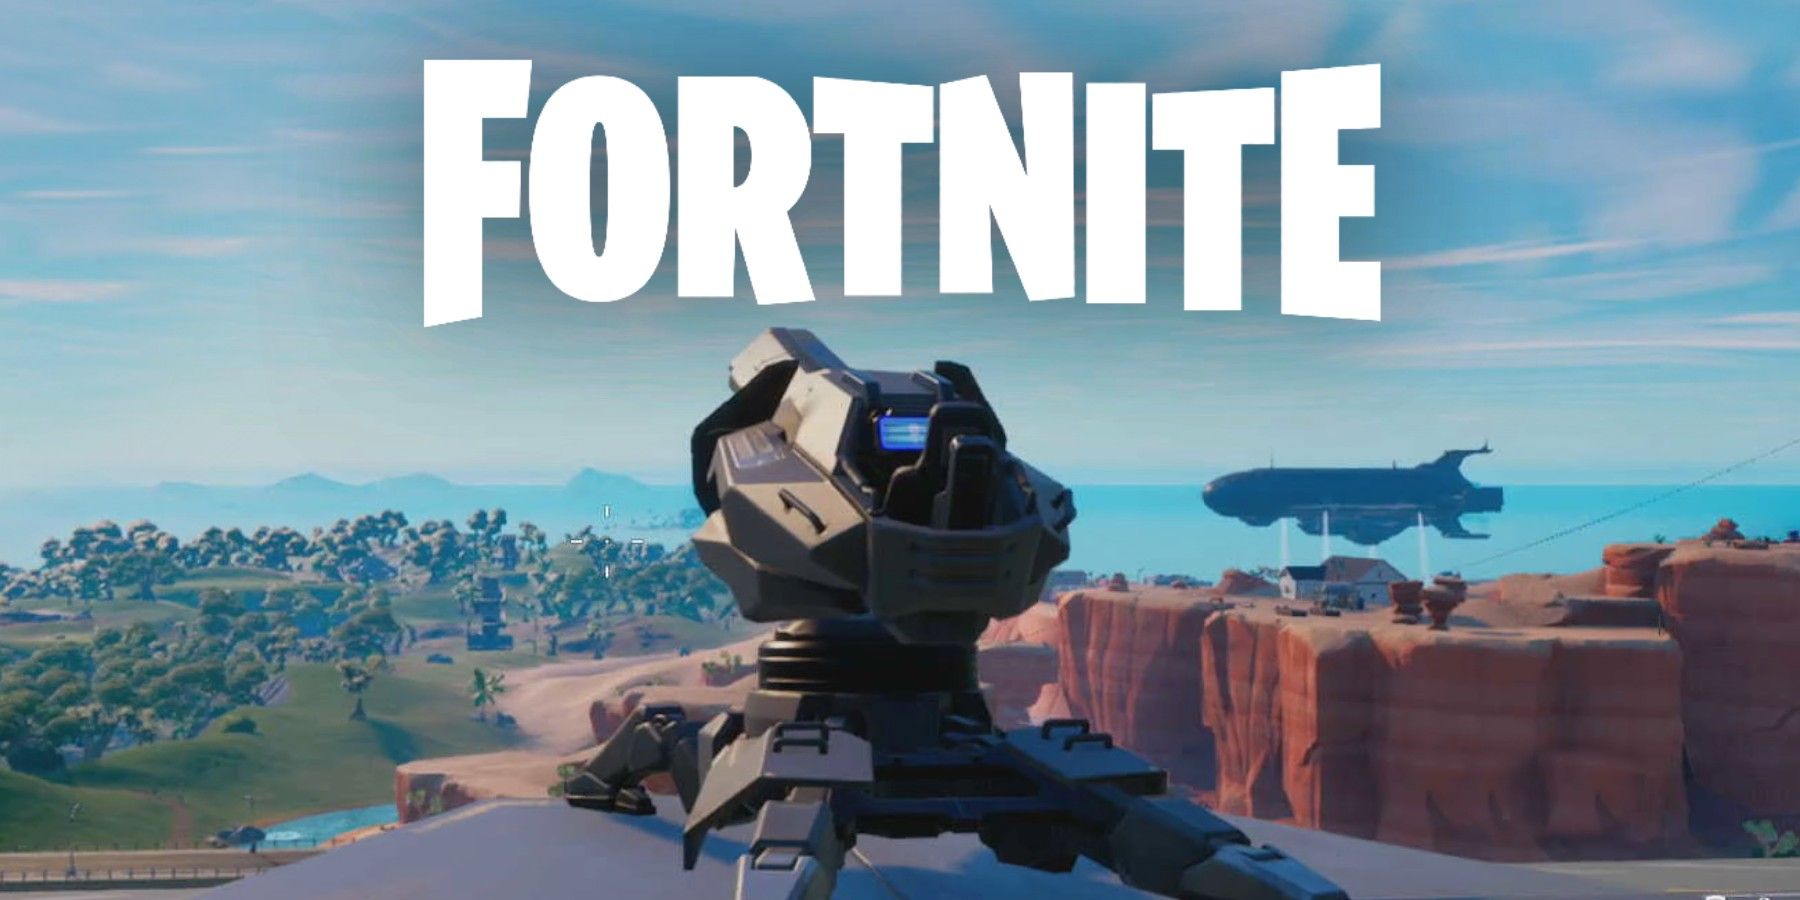 fortnite siege cannon and logo